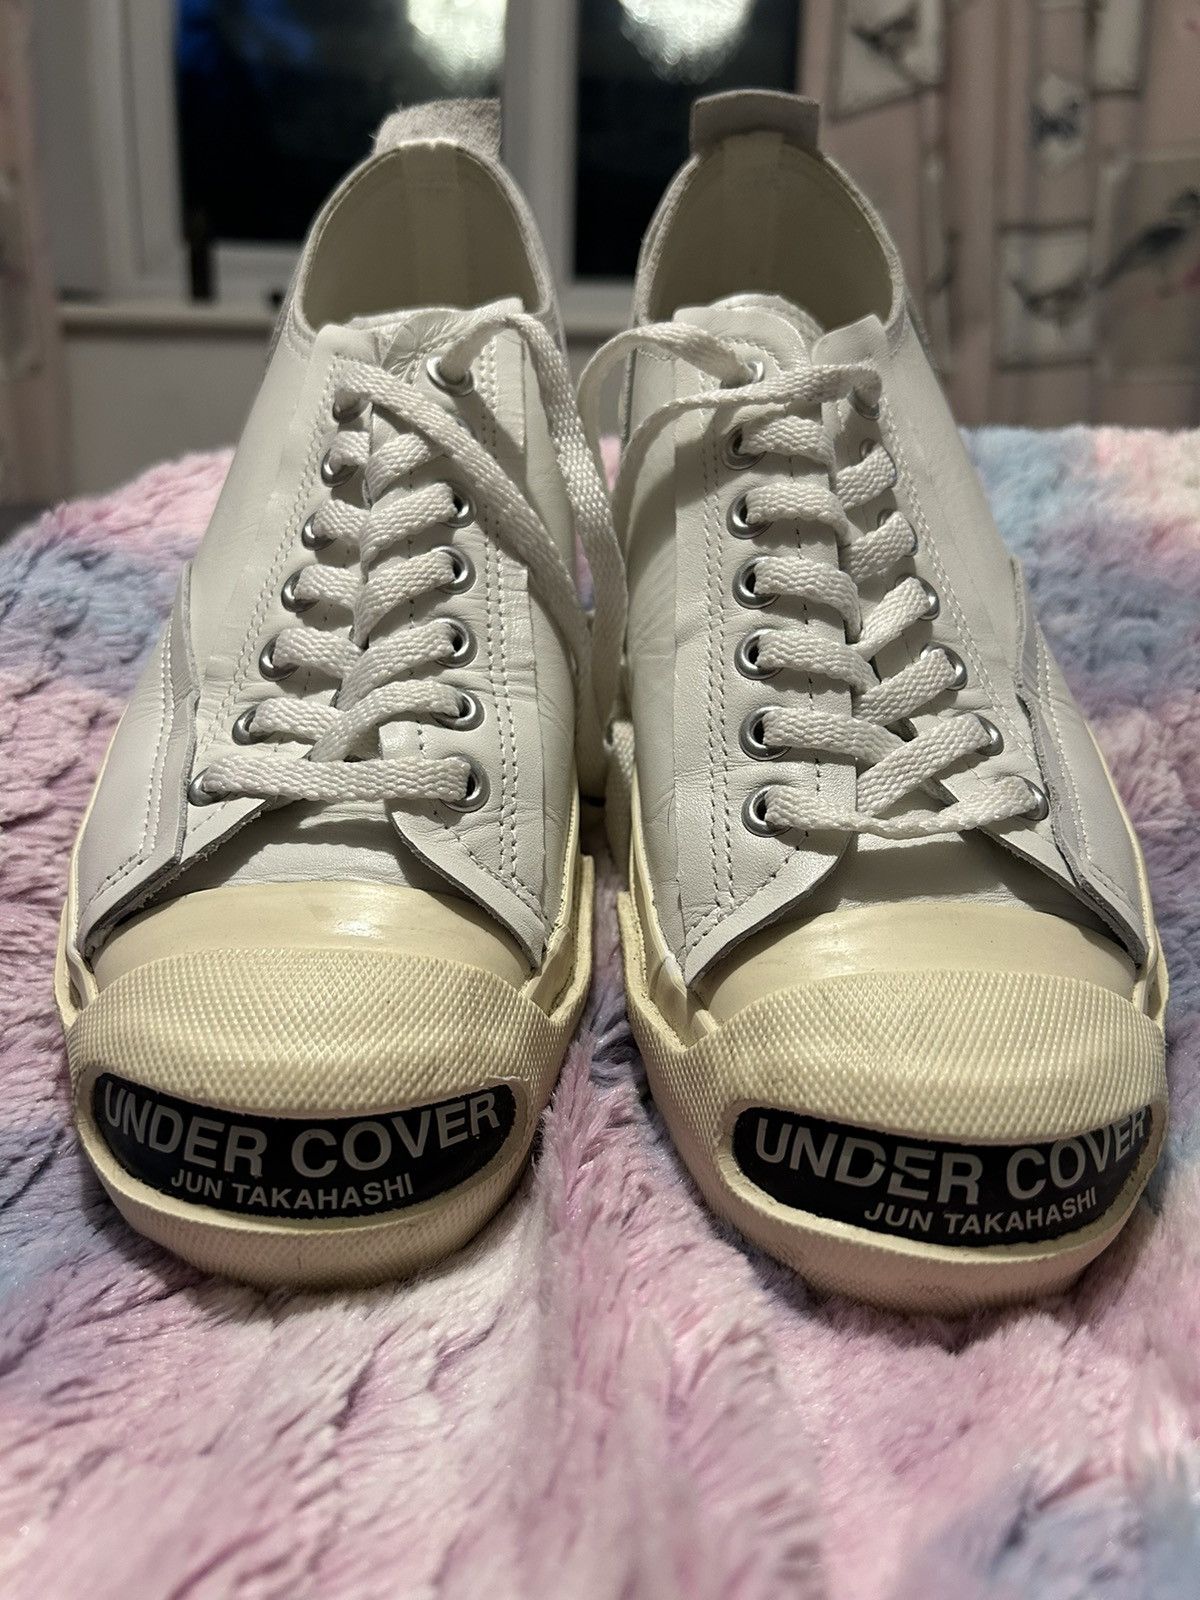 Undercover Undercover Jun Takahashi Jack Purcell Low Top Sneakers 